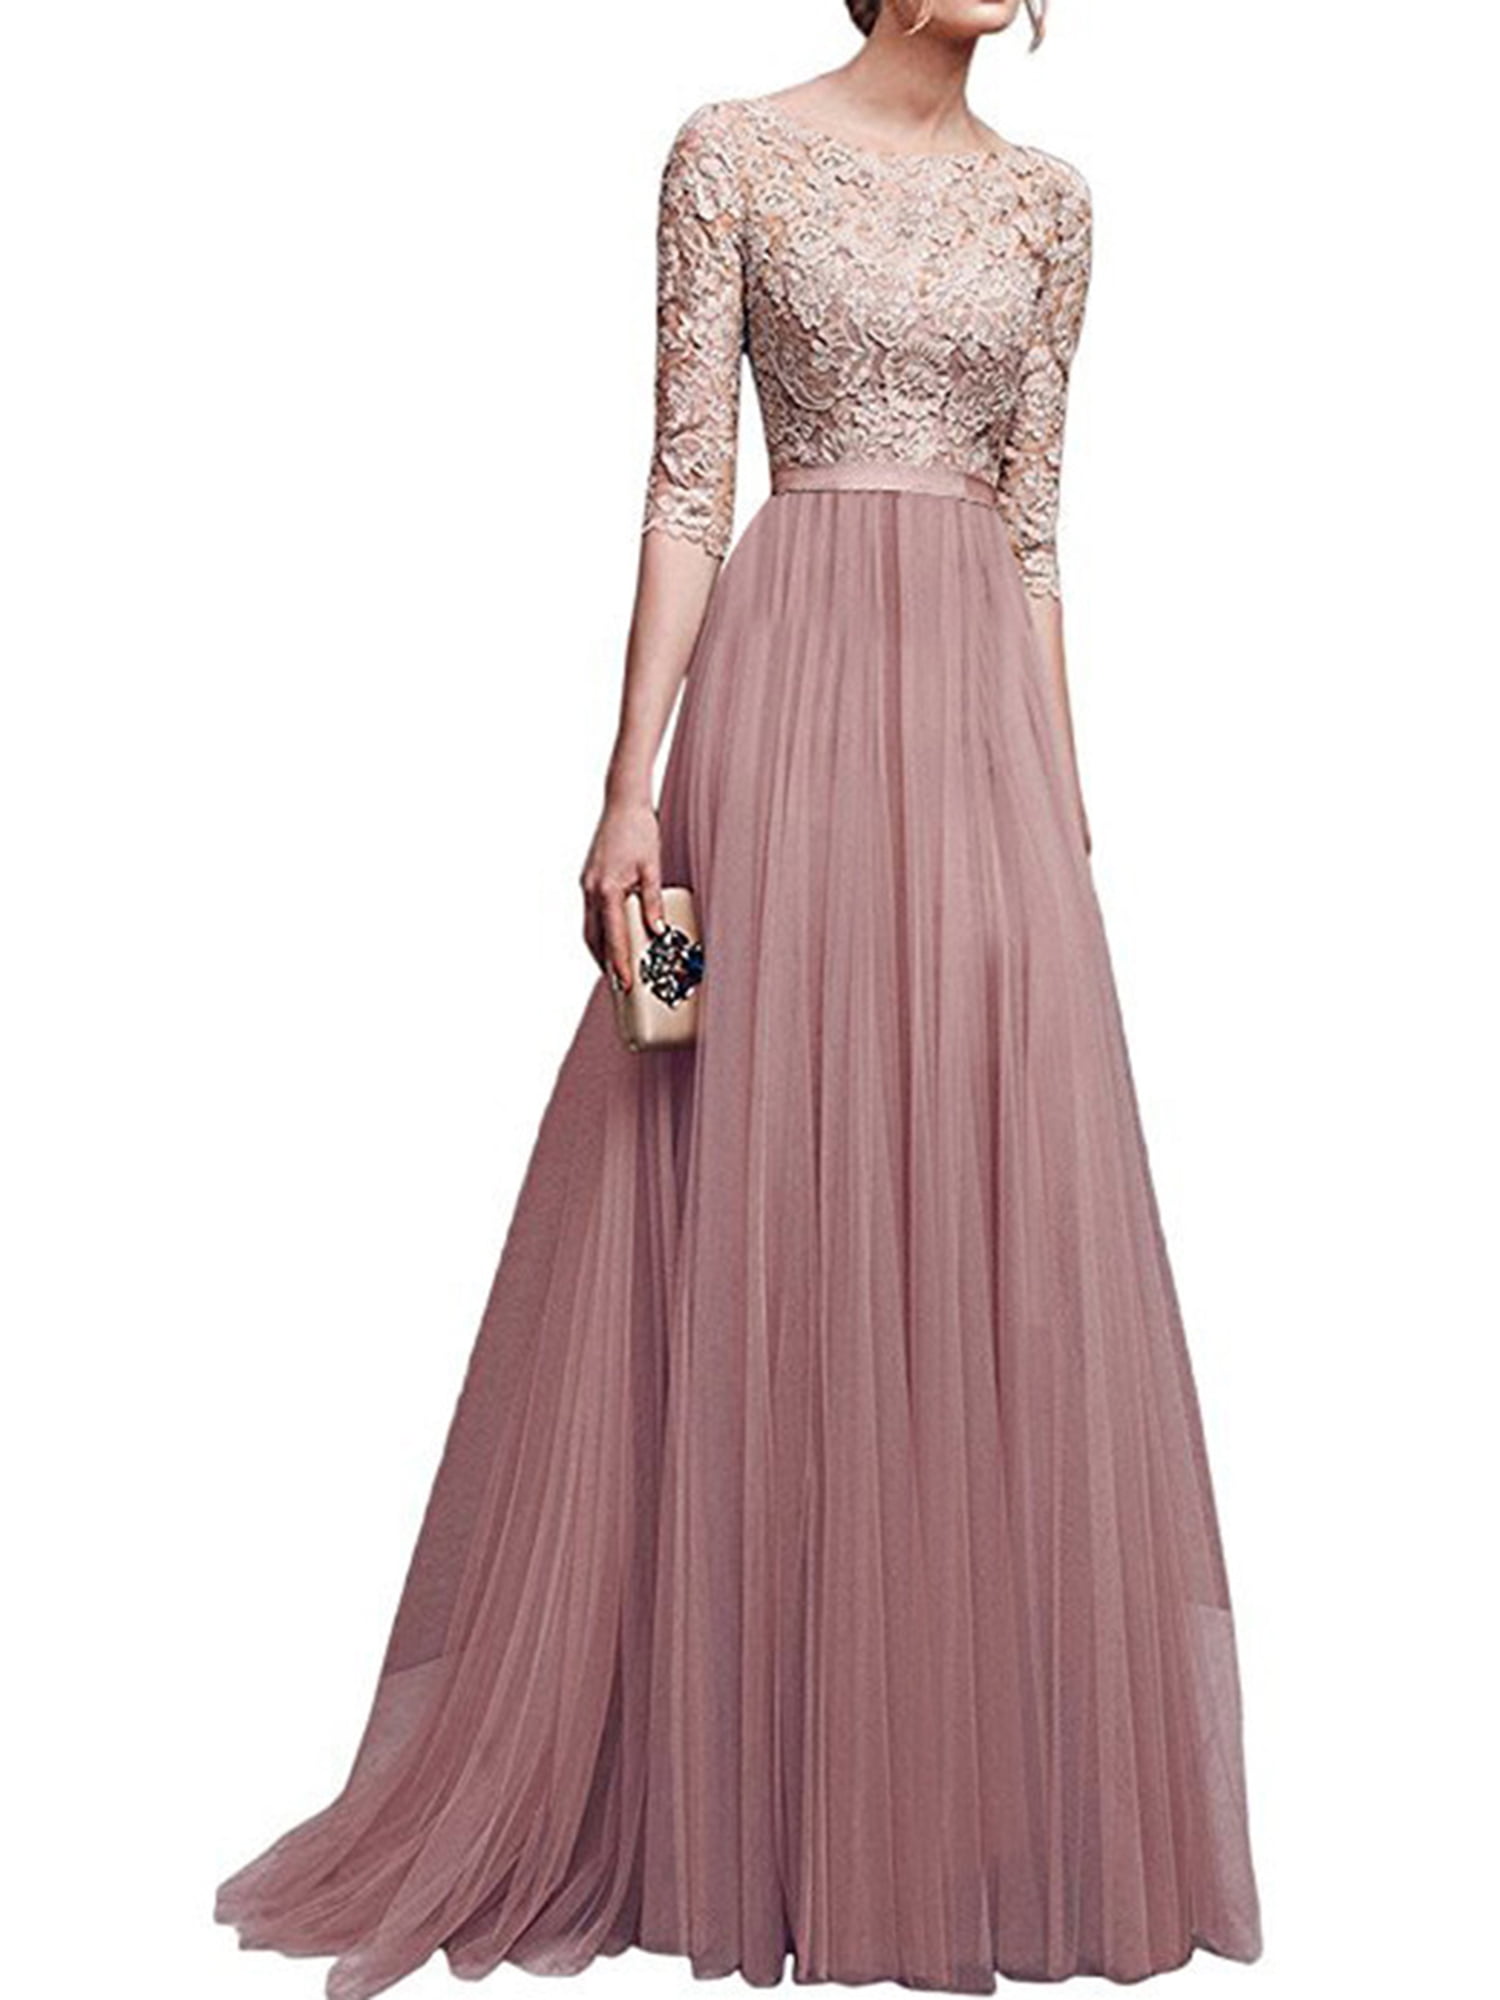 Womens Chiffon Lace Formal Evening Party Gown Prom Bridesmaid Wedding MAXI Dress